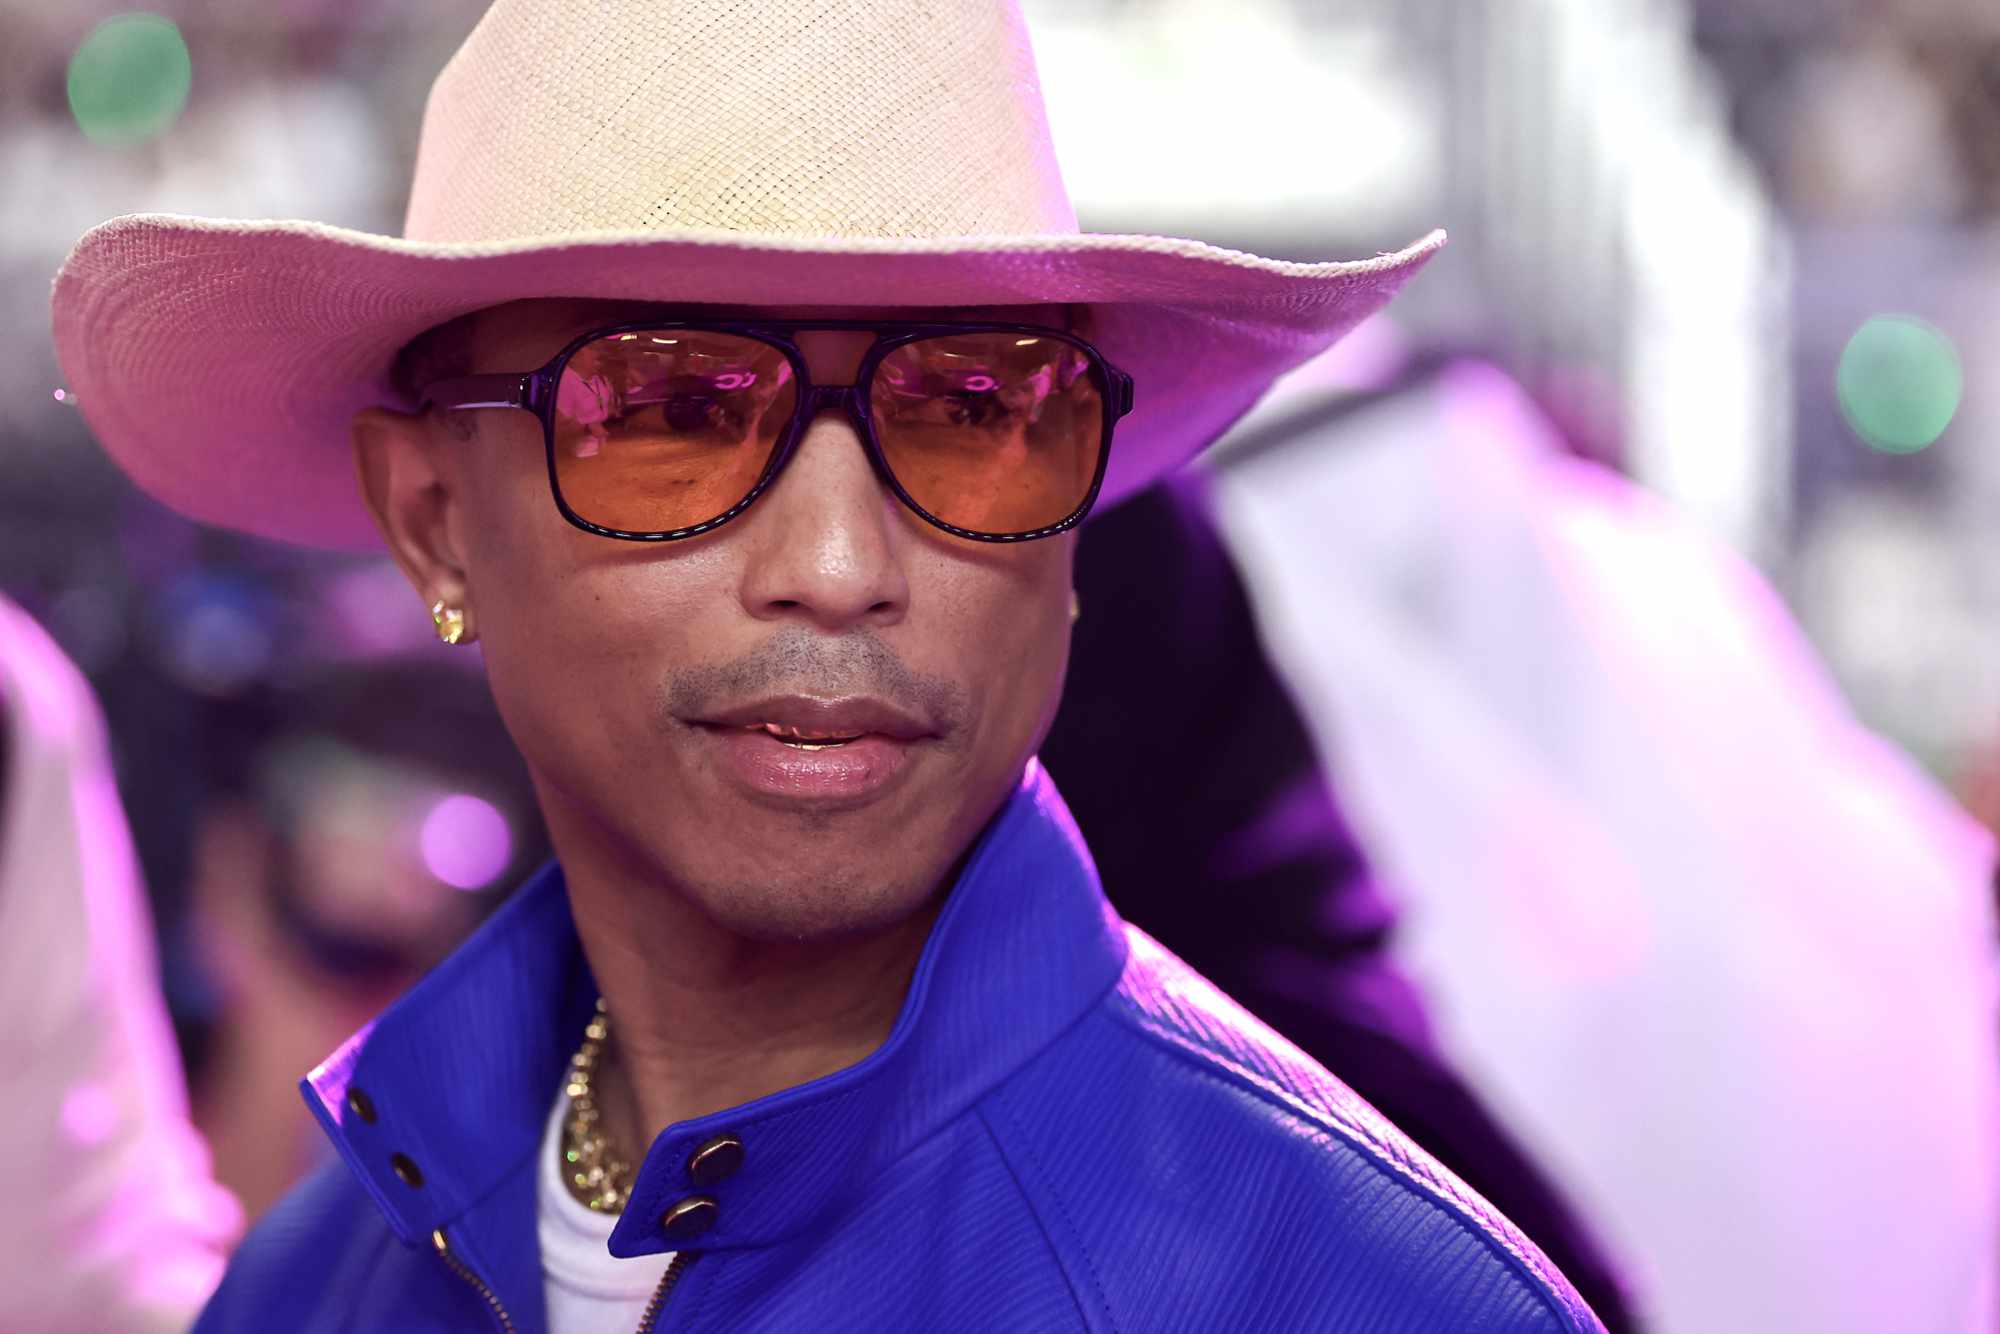 Pharrell Williams wears a white cowboy hat, yellow sunglasses, and a blue jacket at the March 9 F1 Grand Prix of Saudi Arabia